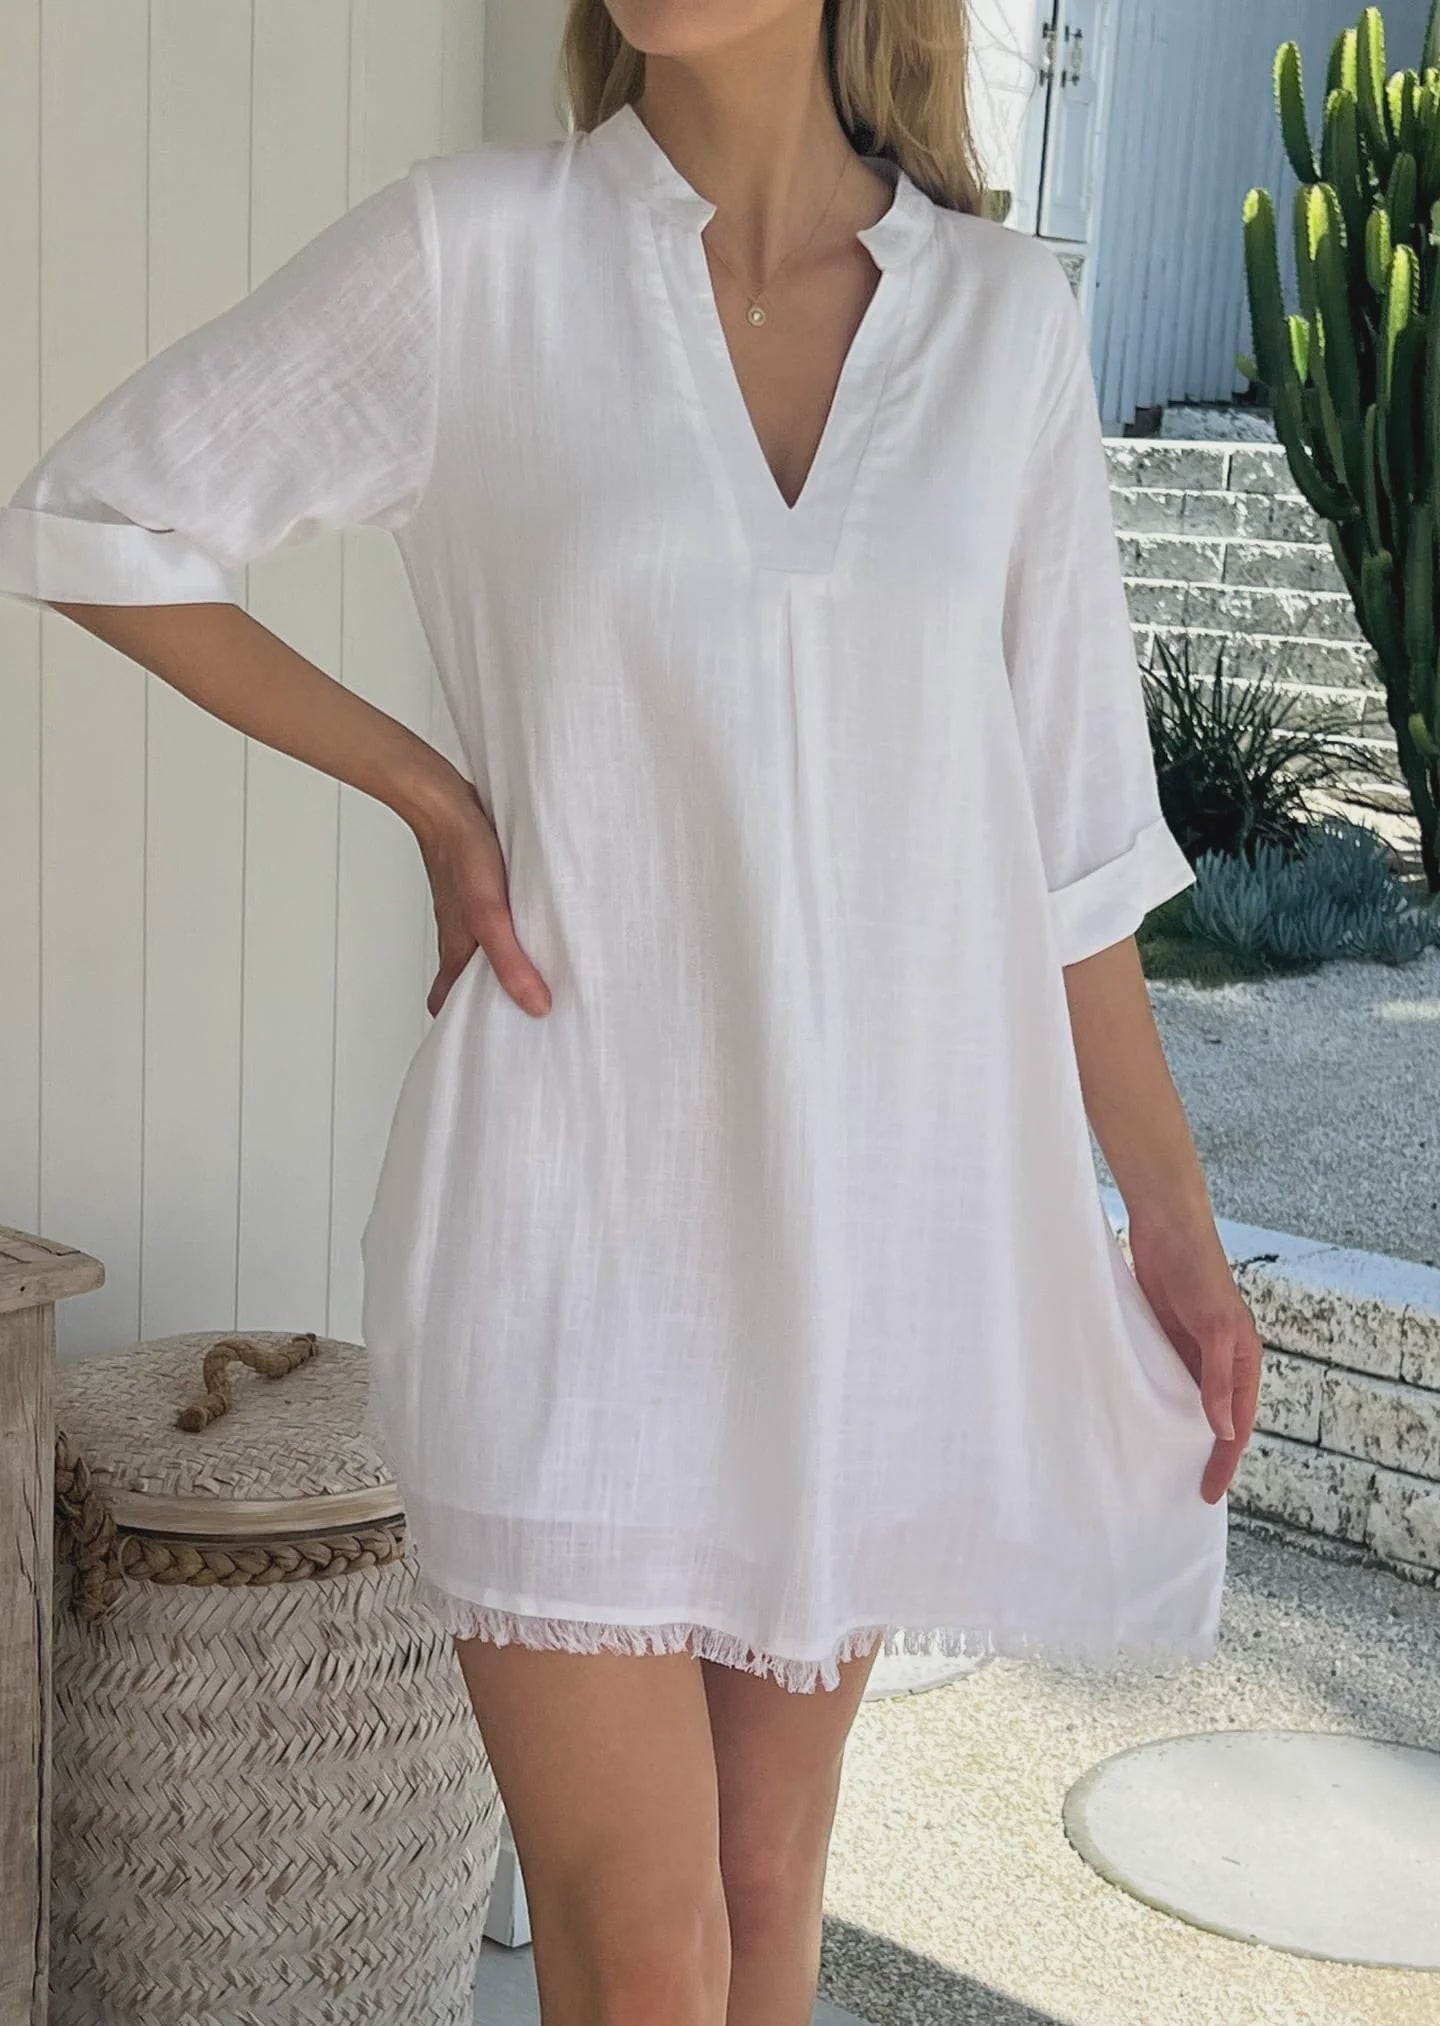 Add some fun to your wardrobe with the Ikon Linen Dress! This effortlessly cool dress features a mandarin neckline, shift fit, and pockets for convenience. The lined design and frayed hem add a touch of edginess. A must-have for any fashion-forward individual